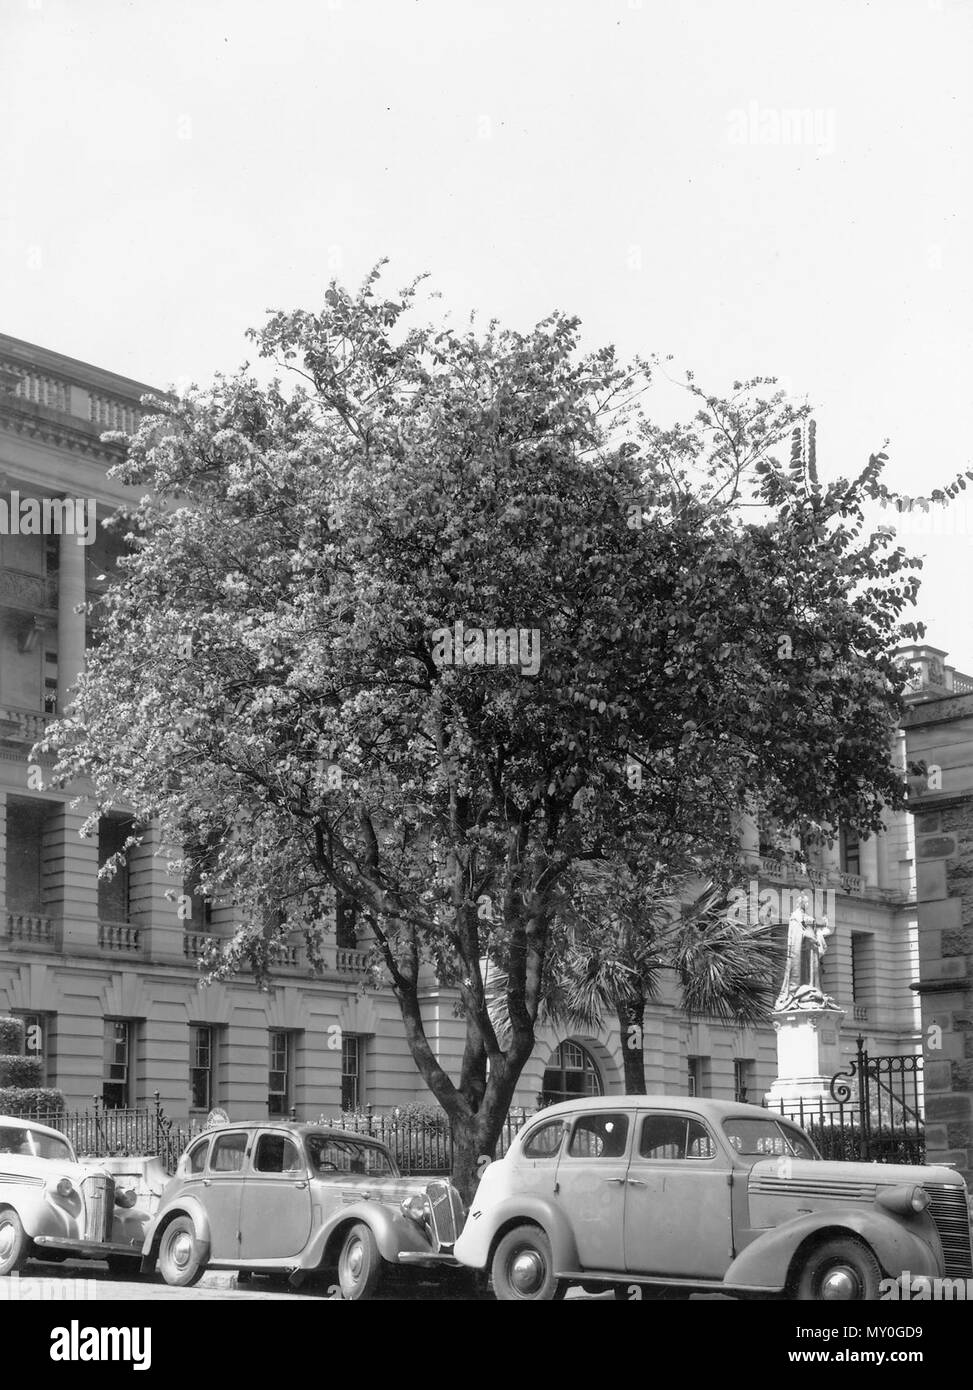 Bauhinia Tree, George Street, Brisbane City, 1949. The Brisbane Courier 22 March 1930  BRISBANE'S FLOWER. 21506577 )   Named after John and Caspar Bauhin, twin brothers, and famous botanists of the 17th century, the Bauhinia are very showy flowering trees, and climbers, native in India, Mexico, Jamaica, South Africa, South America, and our own State. They are hardy, free flowering, and easily propagated from seed. Those usually seen about Brisbane are Bauhinia varlegata, with purplish flowers, and B. candida with white flowers, both of which flower after leaves have fallen off. They are good s Stock Photo